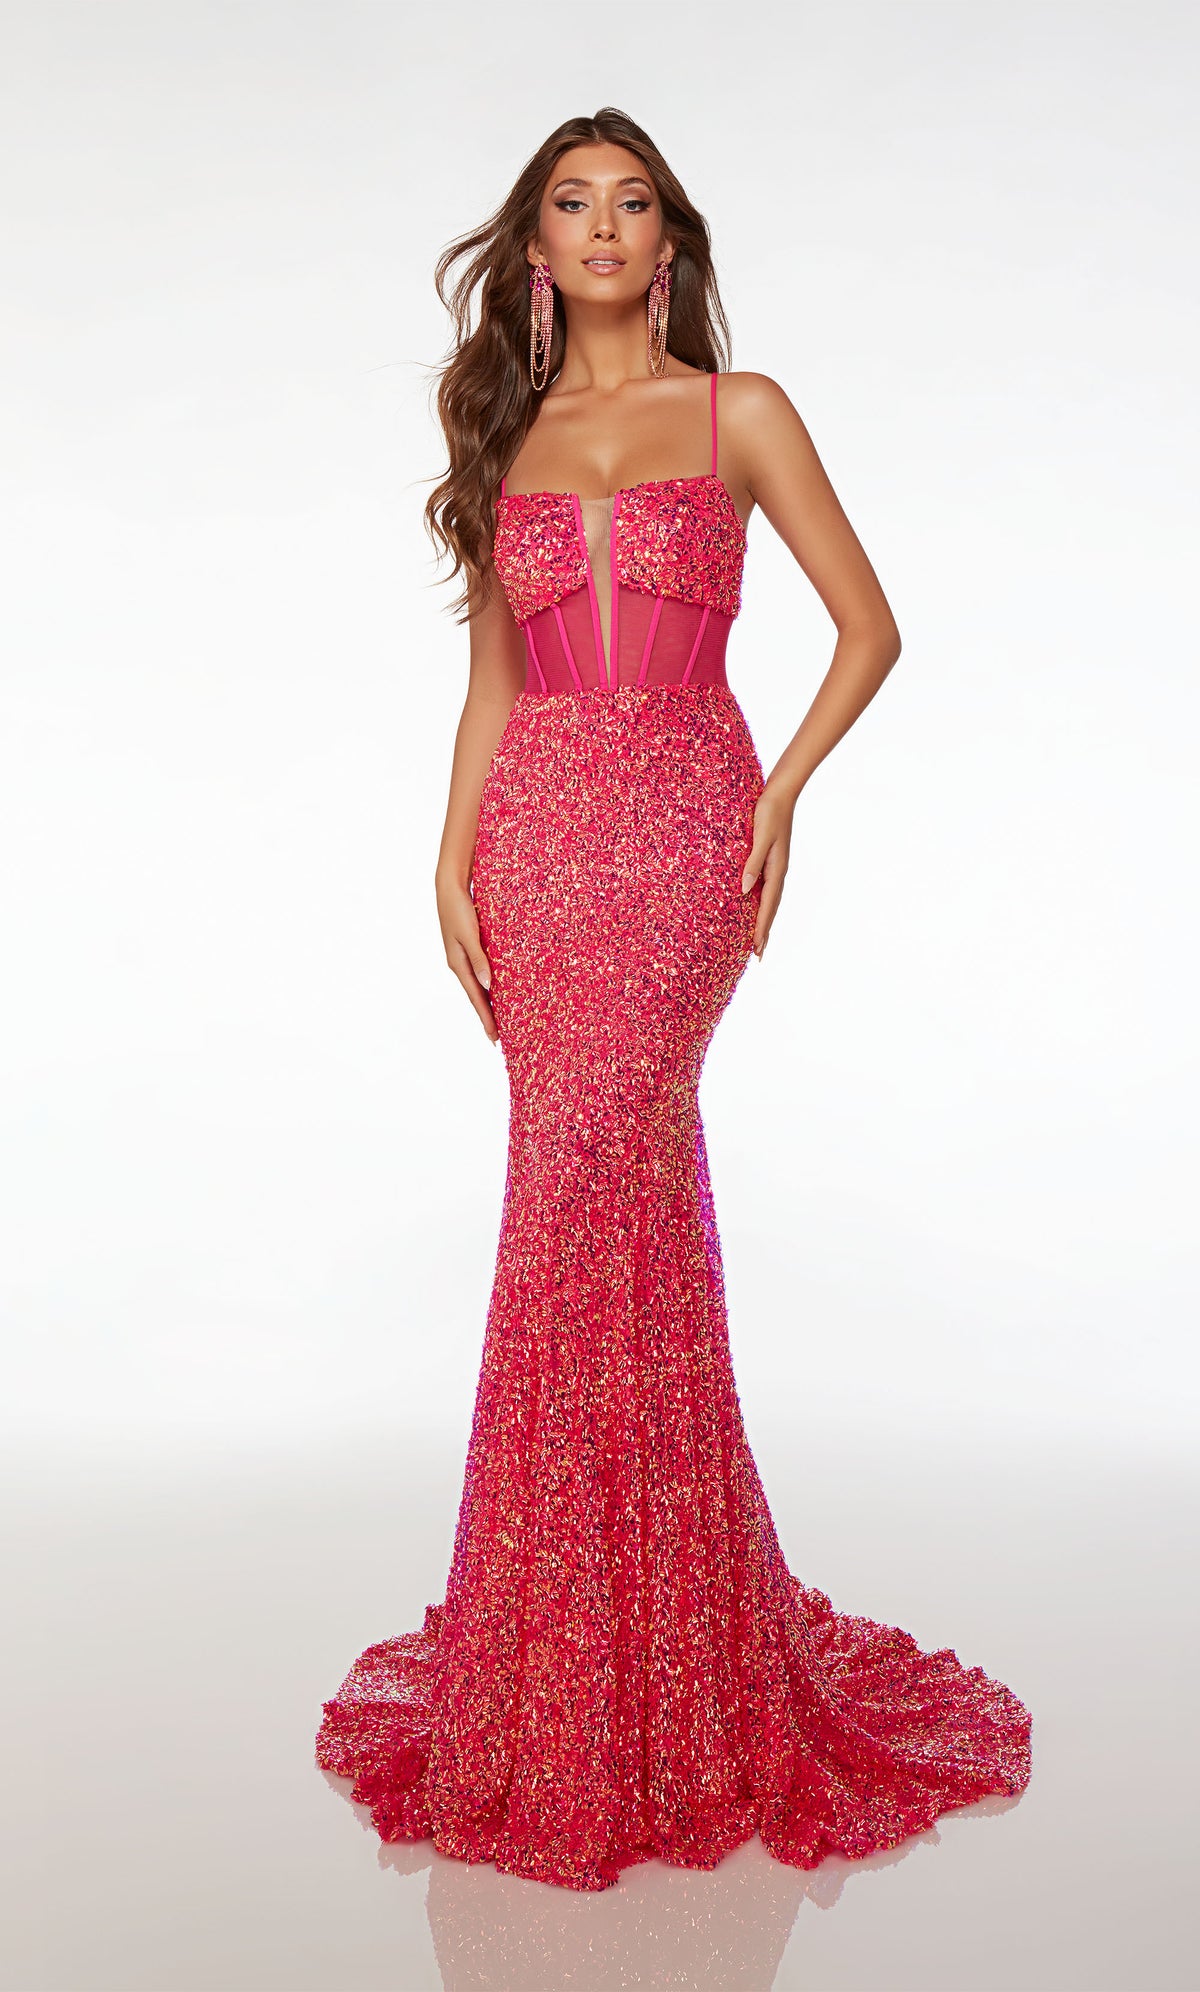 Dazzling pink sequin mermaid dress with an square plunging neckline, sheer corset top, crisscross lace-up back, and an gracefully long train.